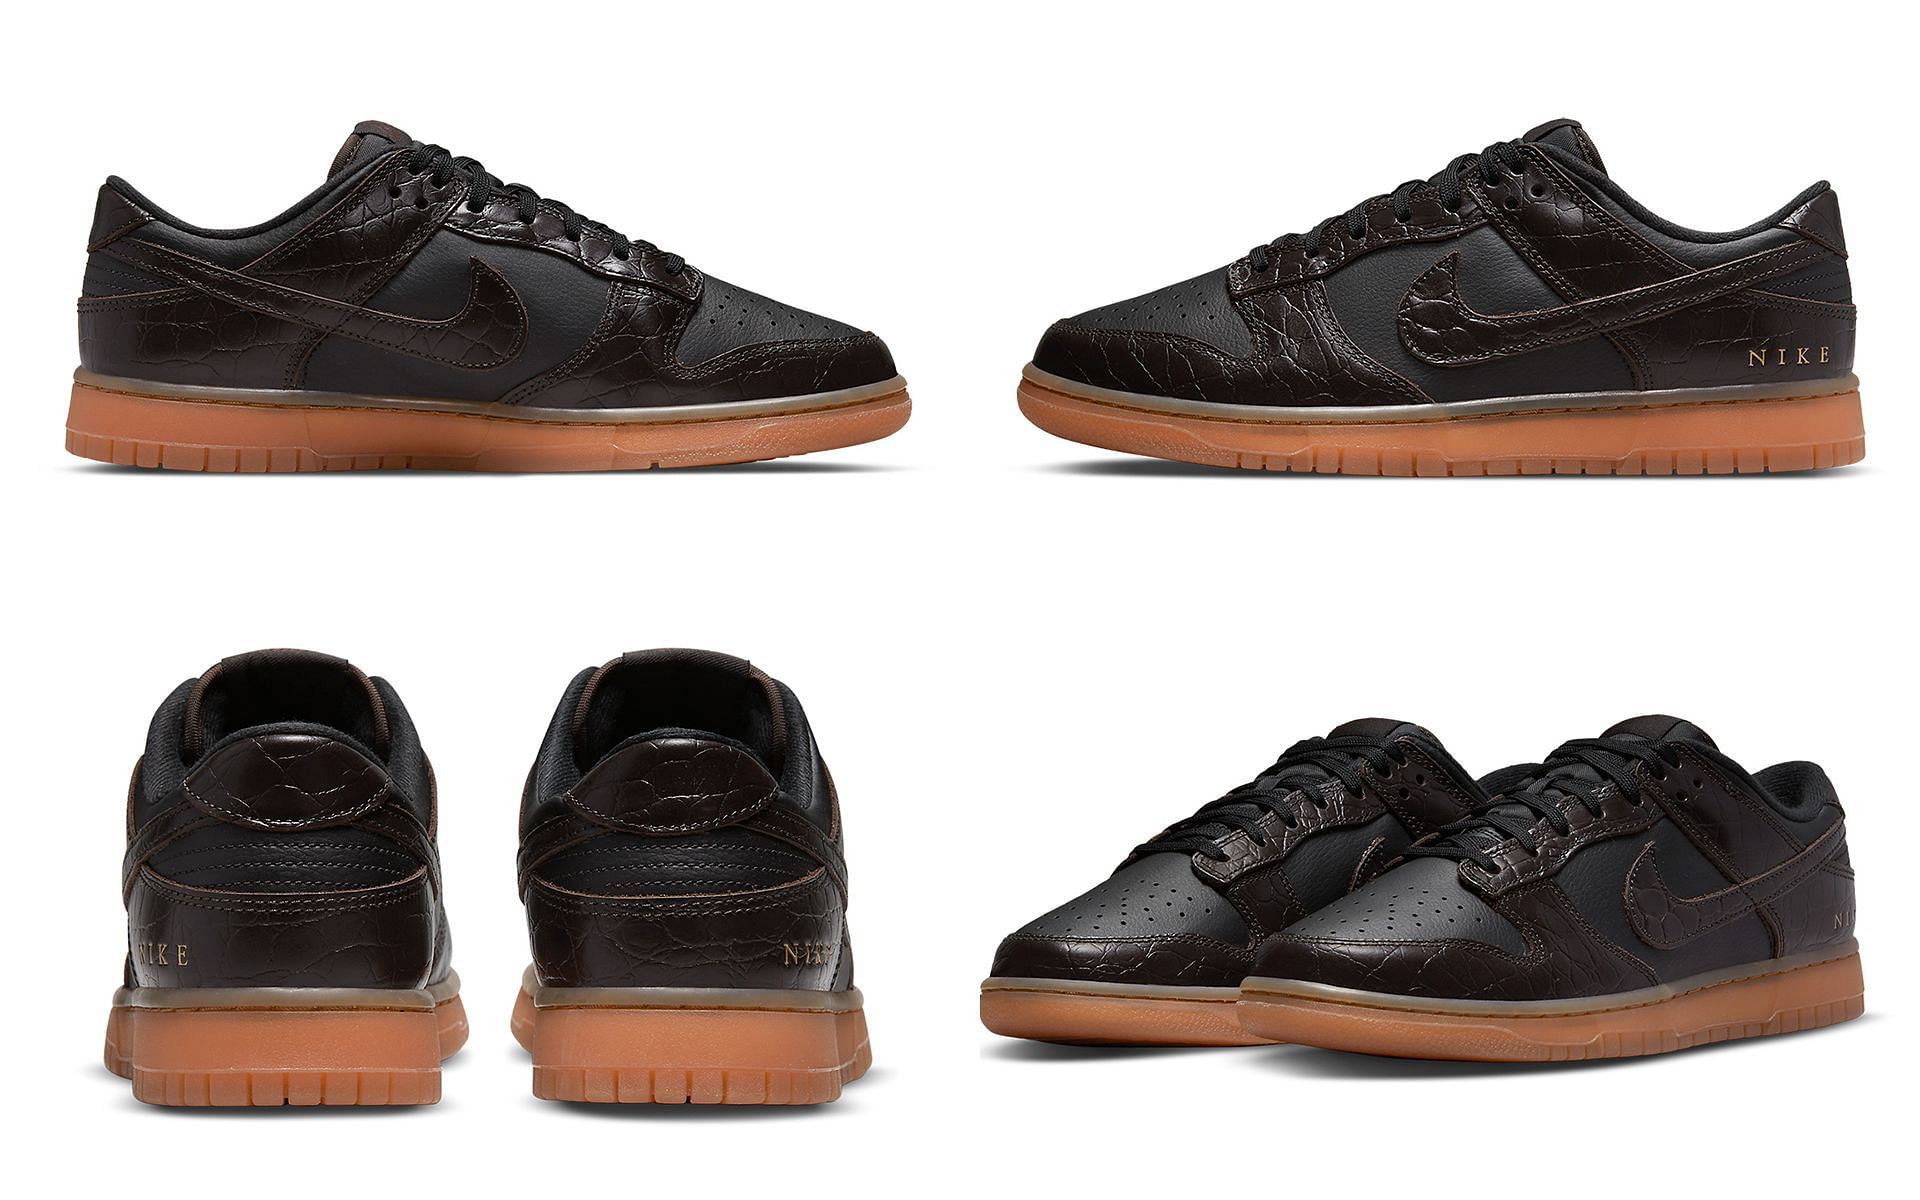 New Nike Dunk Low shoes are made with croc-skin (Image via Sportskeeda)